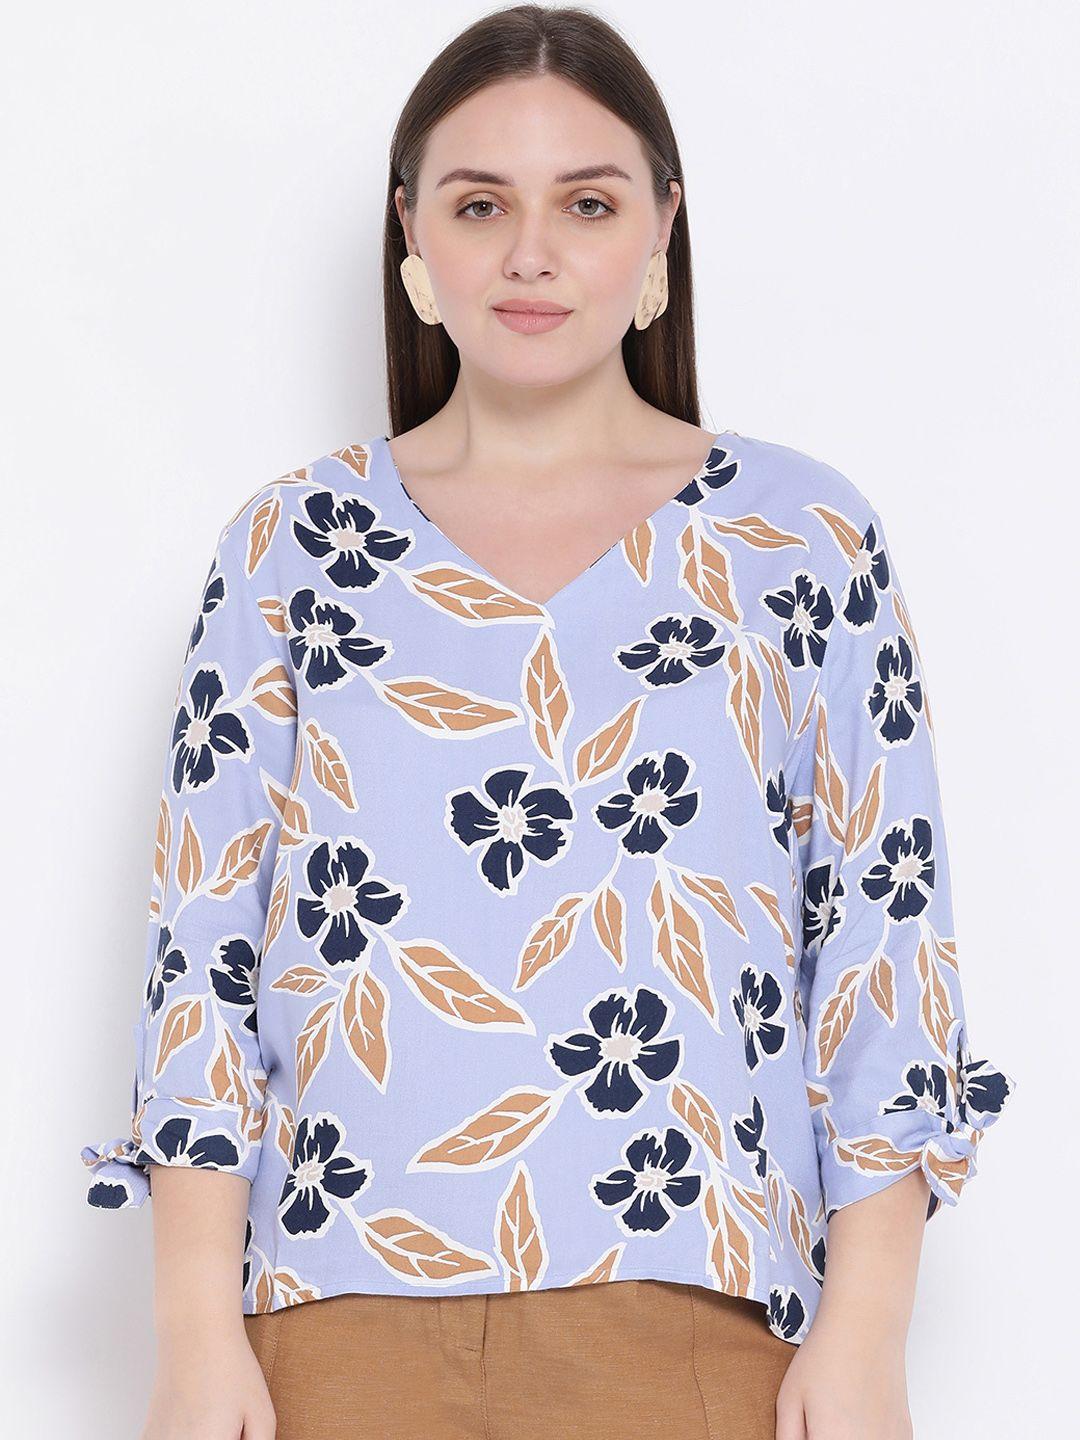 oxolloxo-women-blue-floral-printed-top